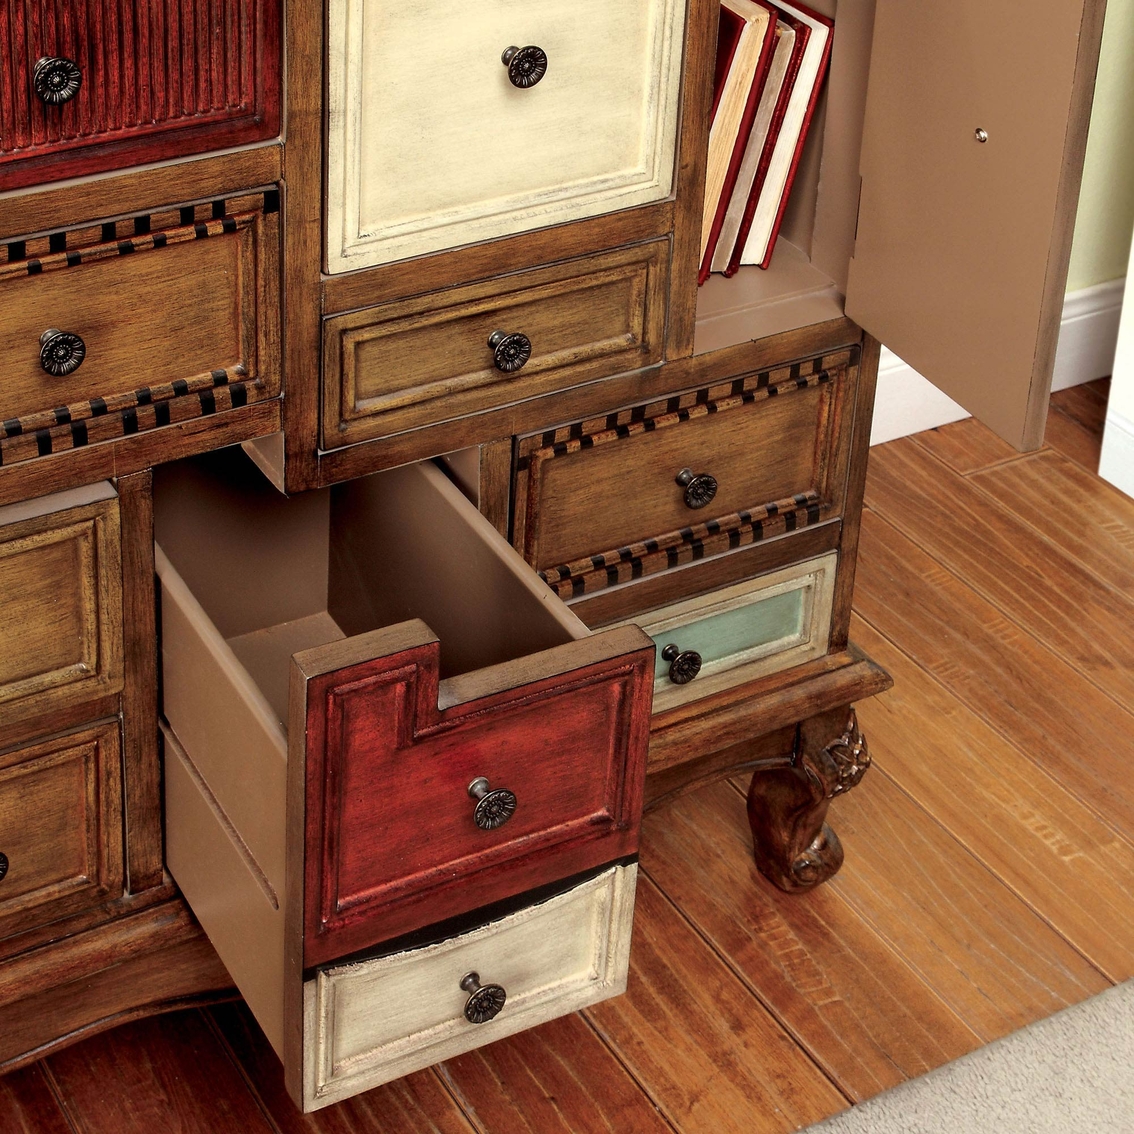 Furniture of America Desree Accent Chest - Image 3 of 3